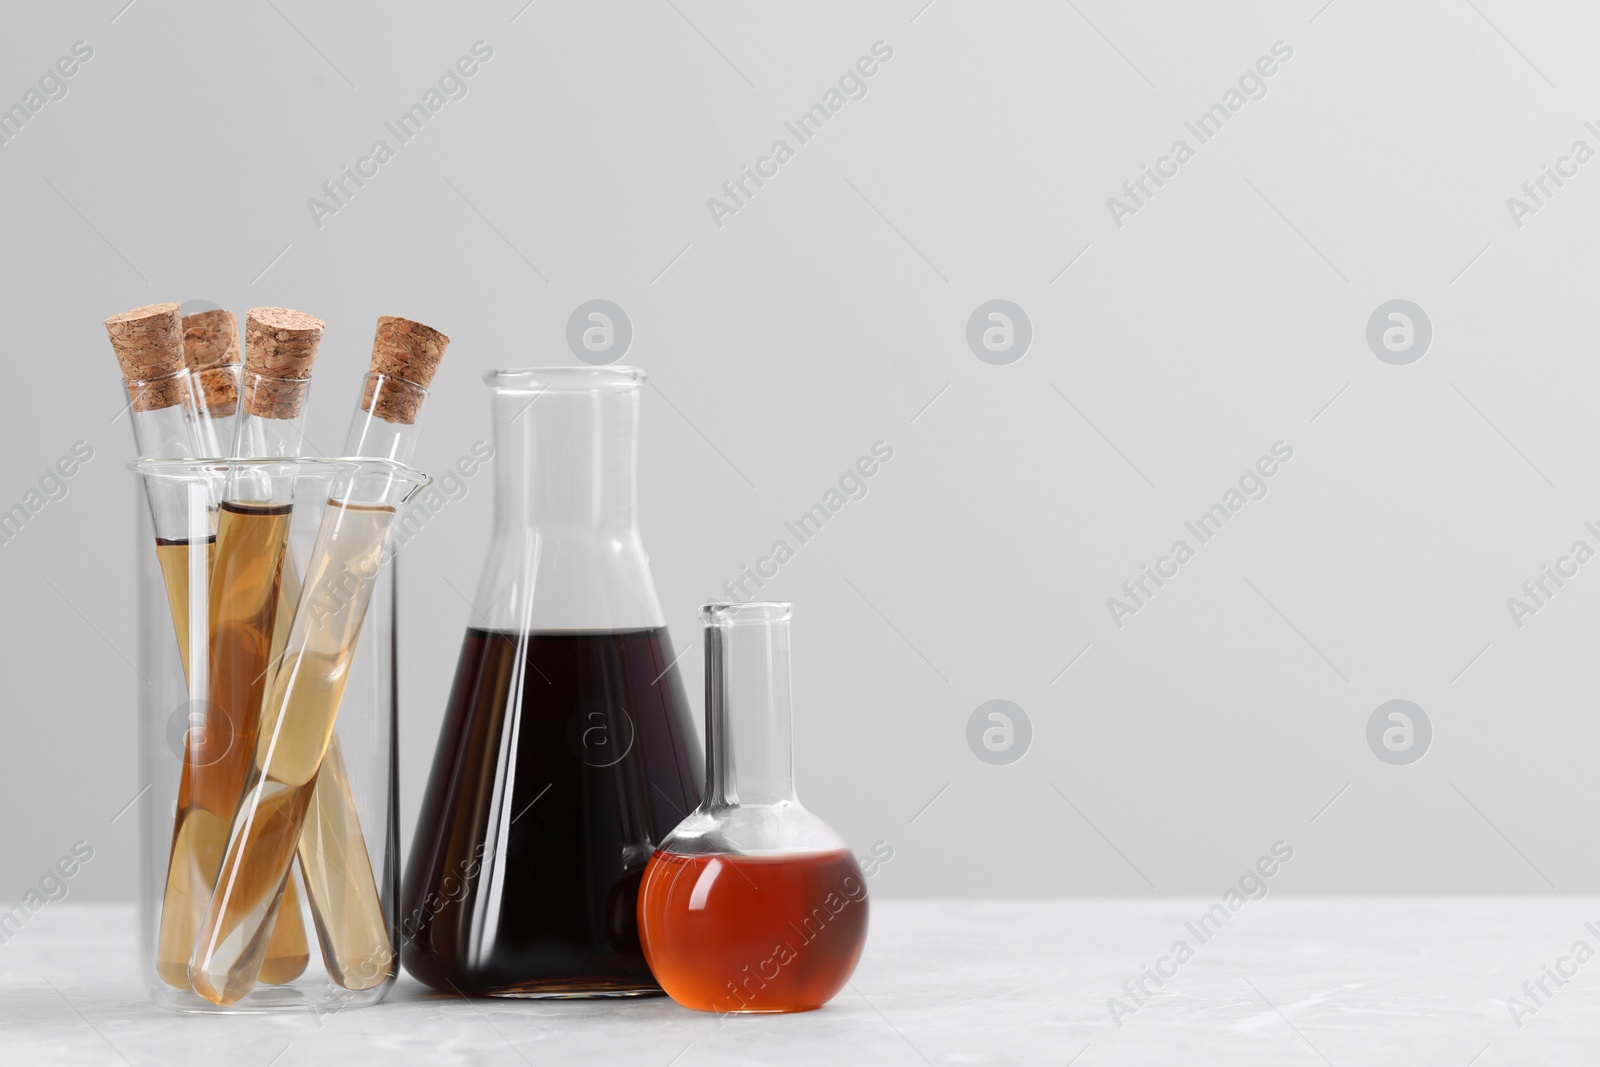 Photo of Different laboratory glassware with brown liquids on white table against light background. Space for text